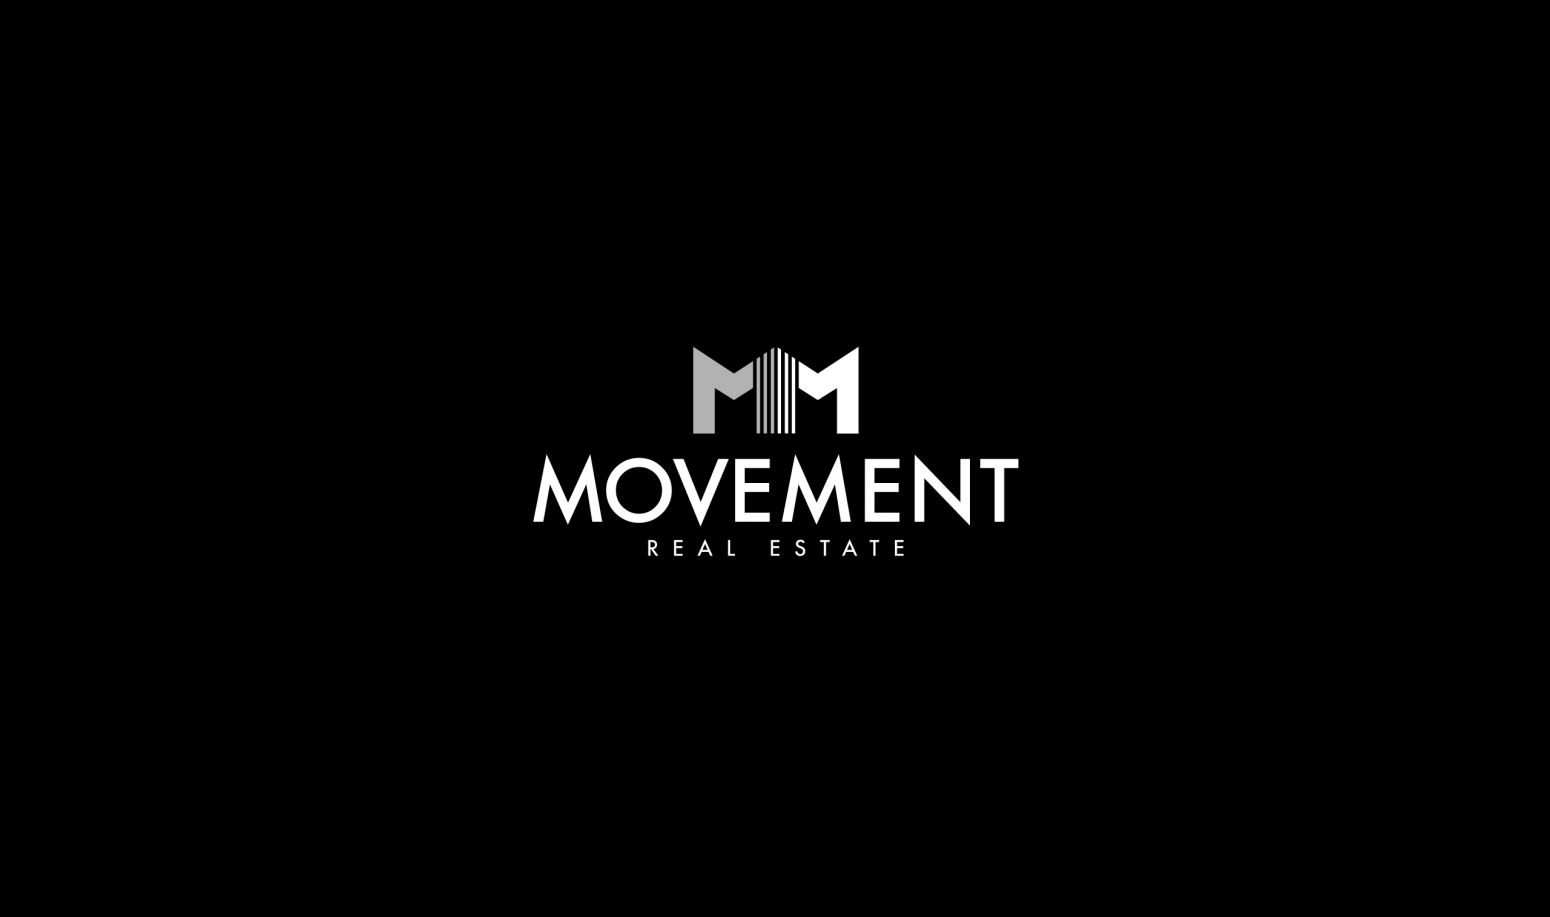 Movement Real Estate - AGH & Friends